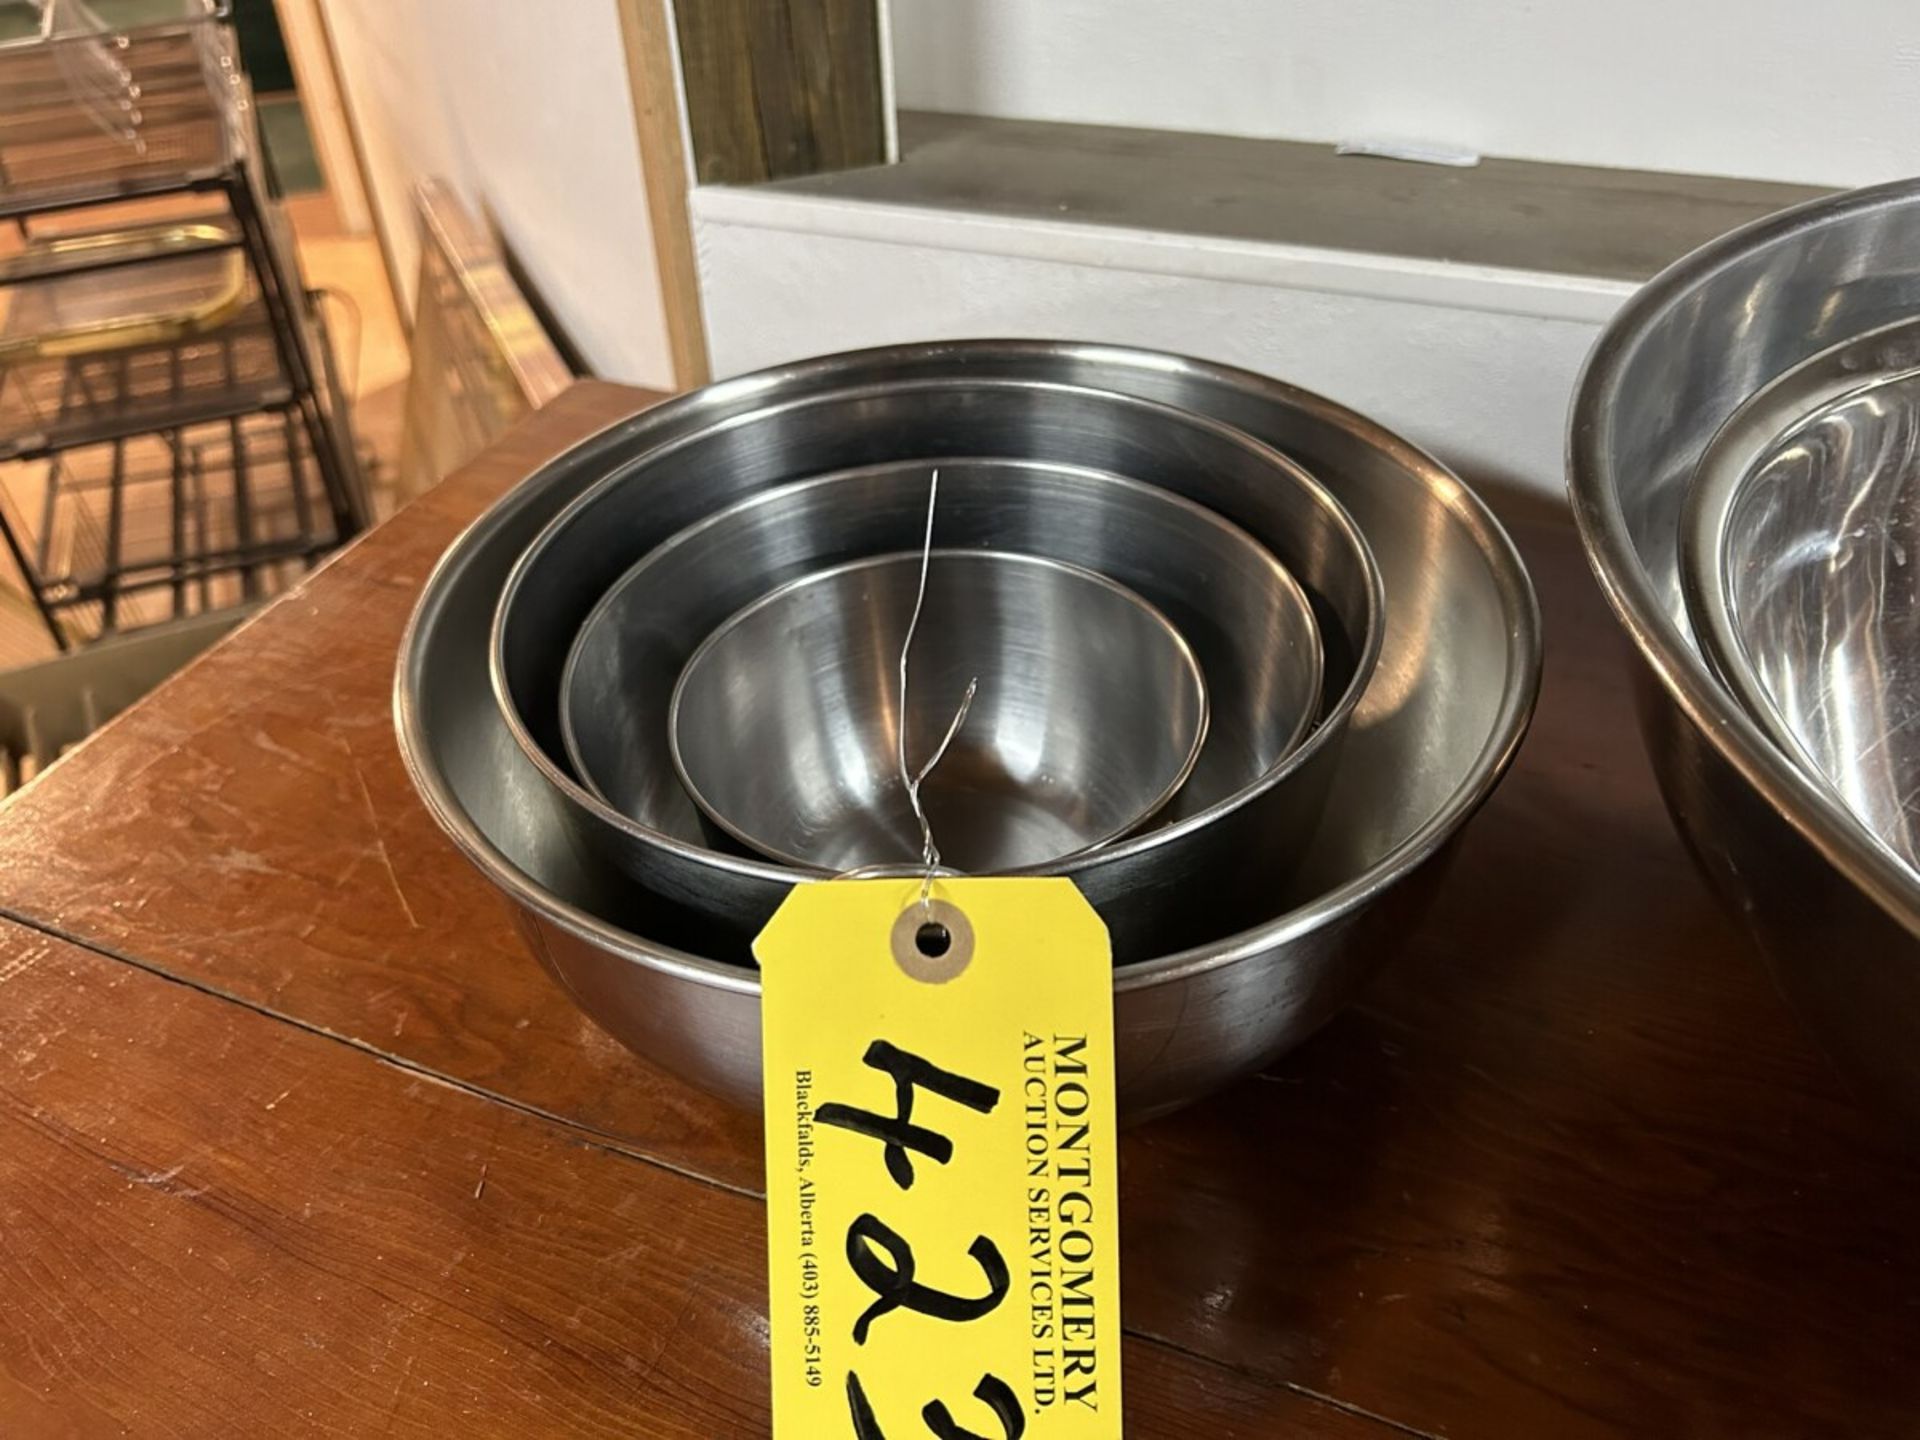 L/O ASSORTED STAINLESS STEEL BOWLS, STANLESS STEEL STACKING TINS - Image 4 of 4